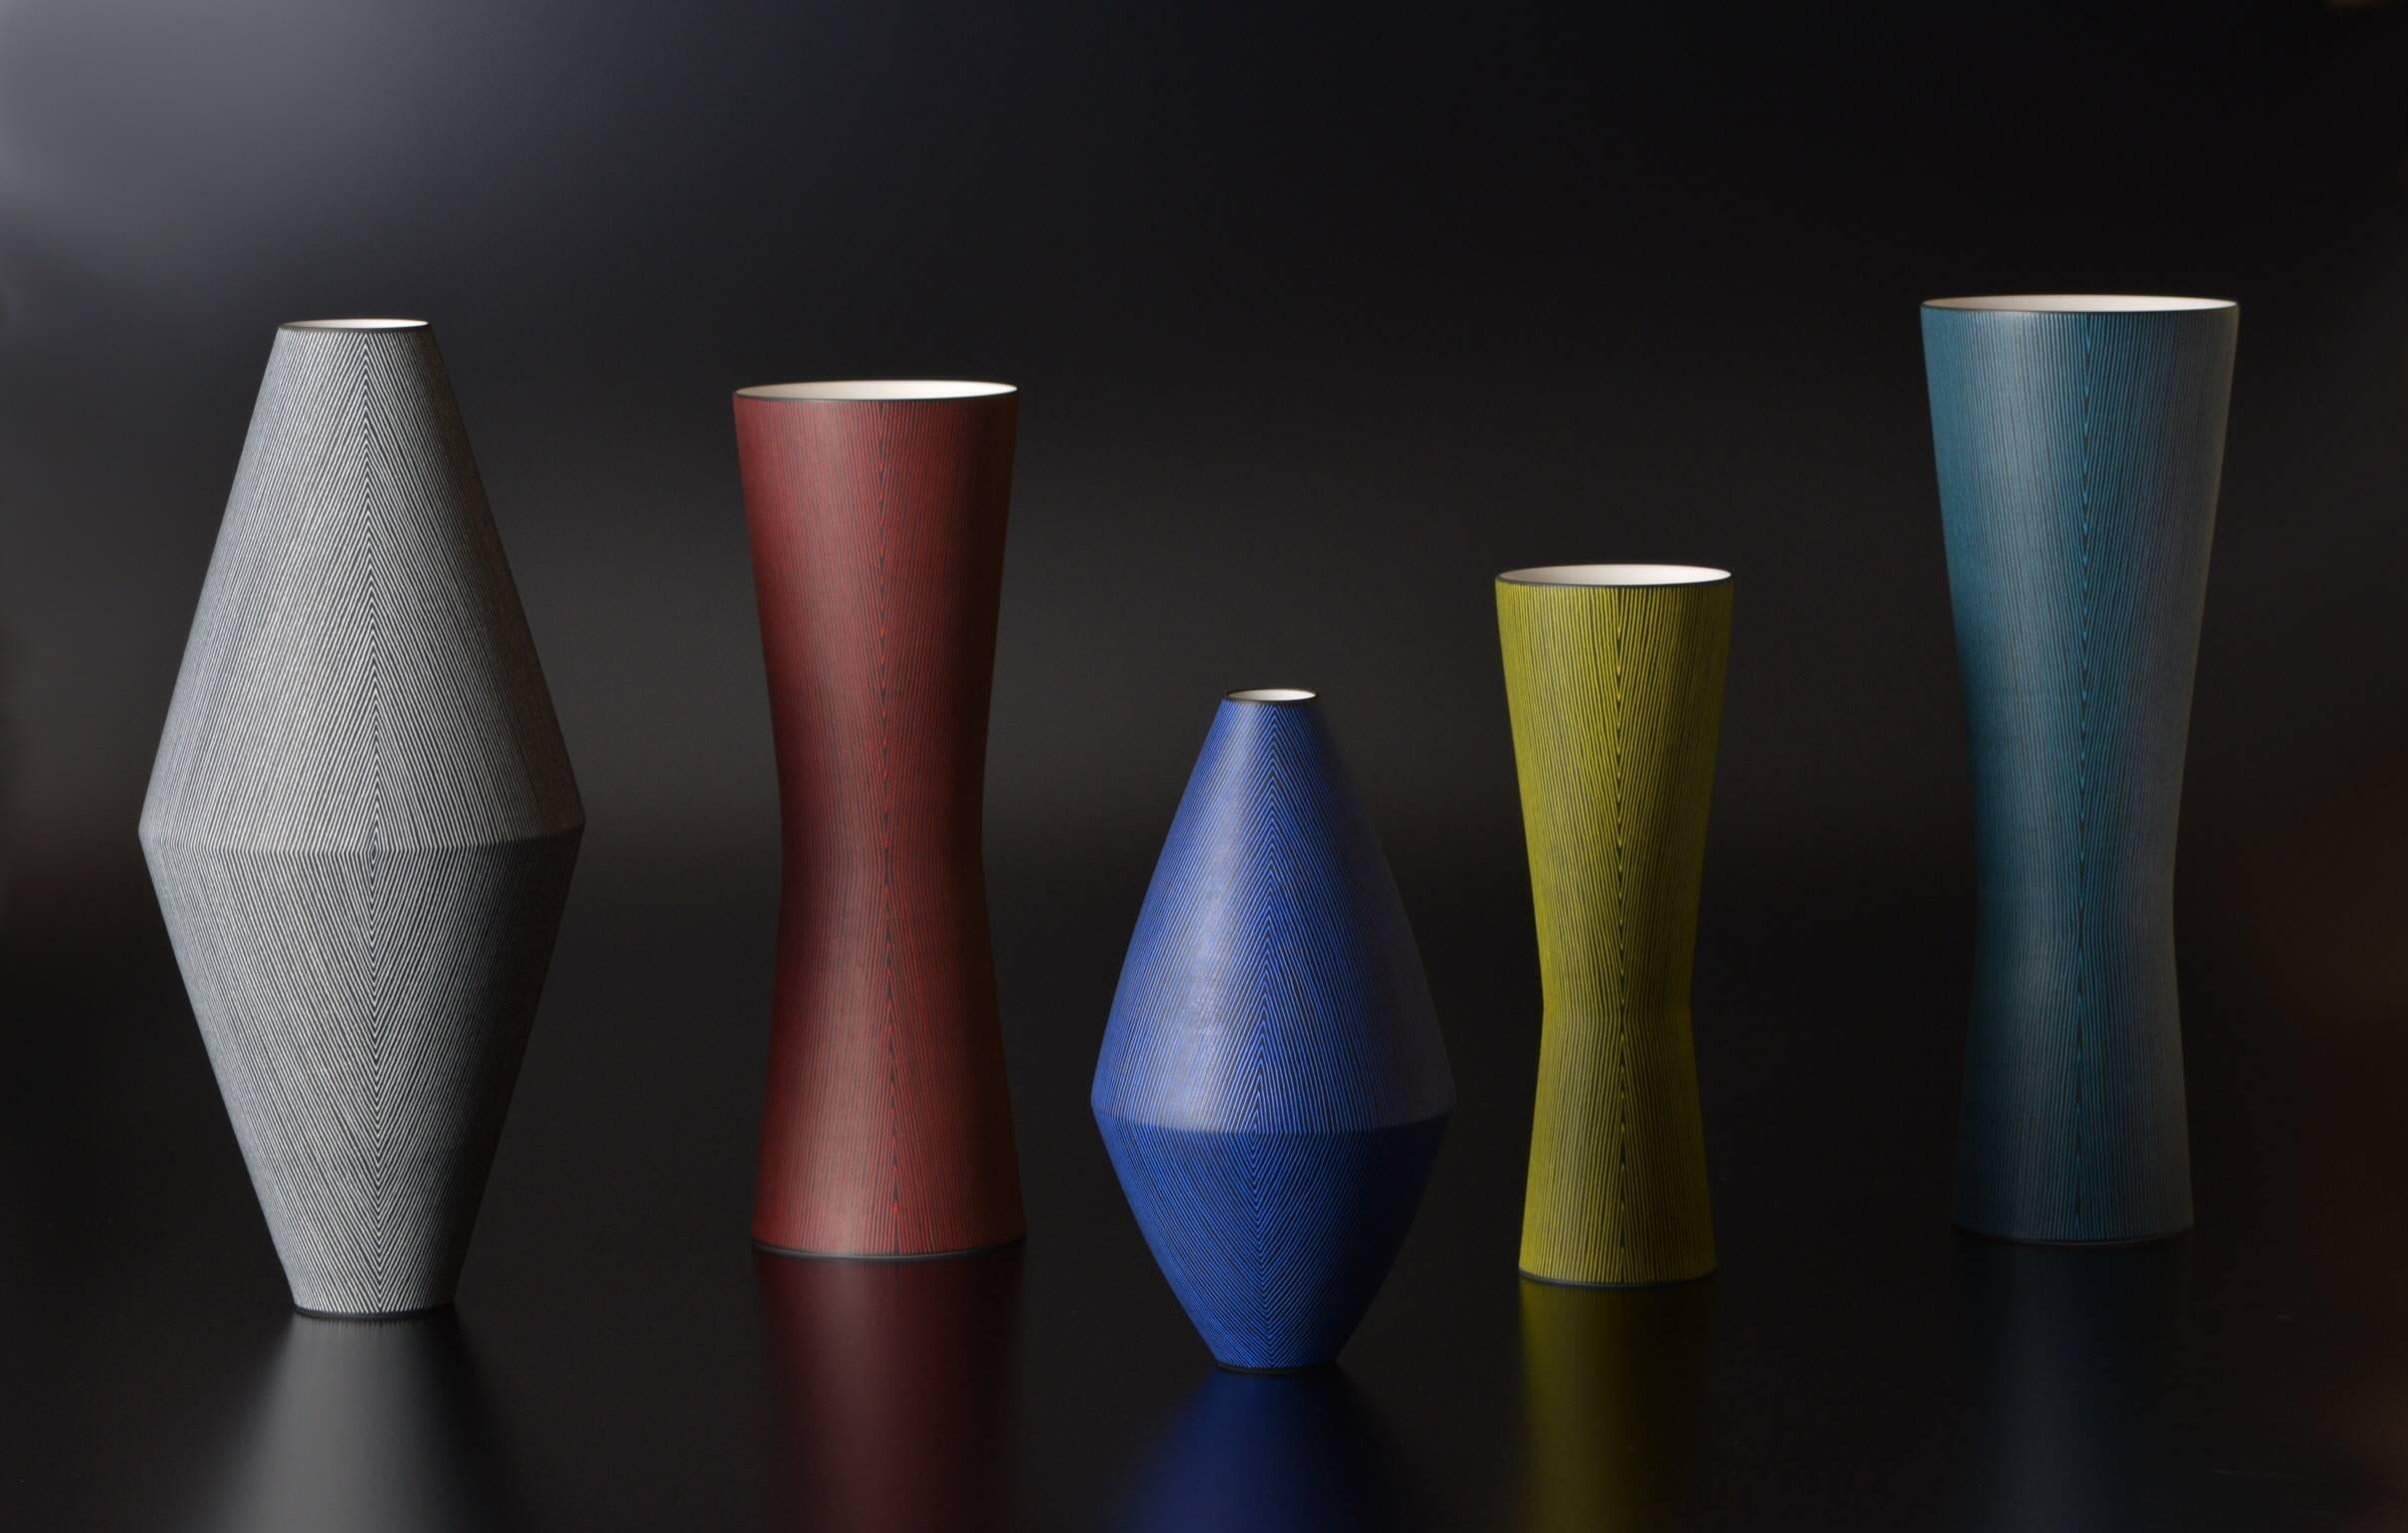 

Offered by  J R Richards
A group of five elegant porcelain vases by Contemporary Ceramic Artist Masaru Nakada (b. 1977-).
This group of vases; each with it's own form, color and style, would stand alone on its own, but to separate them from one